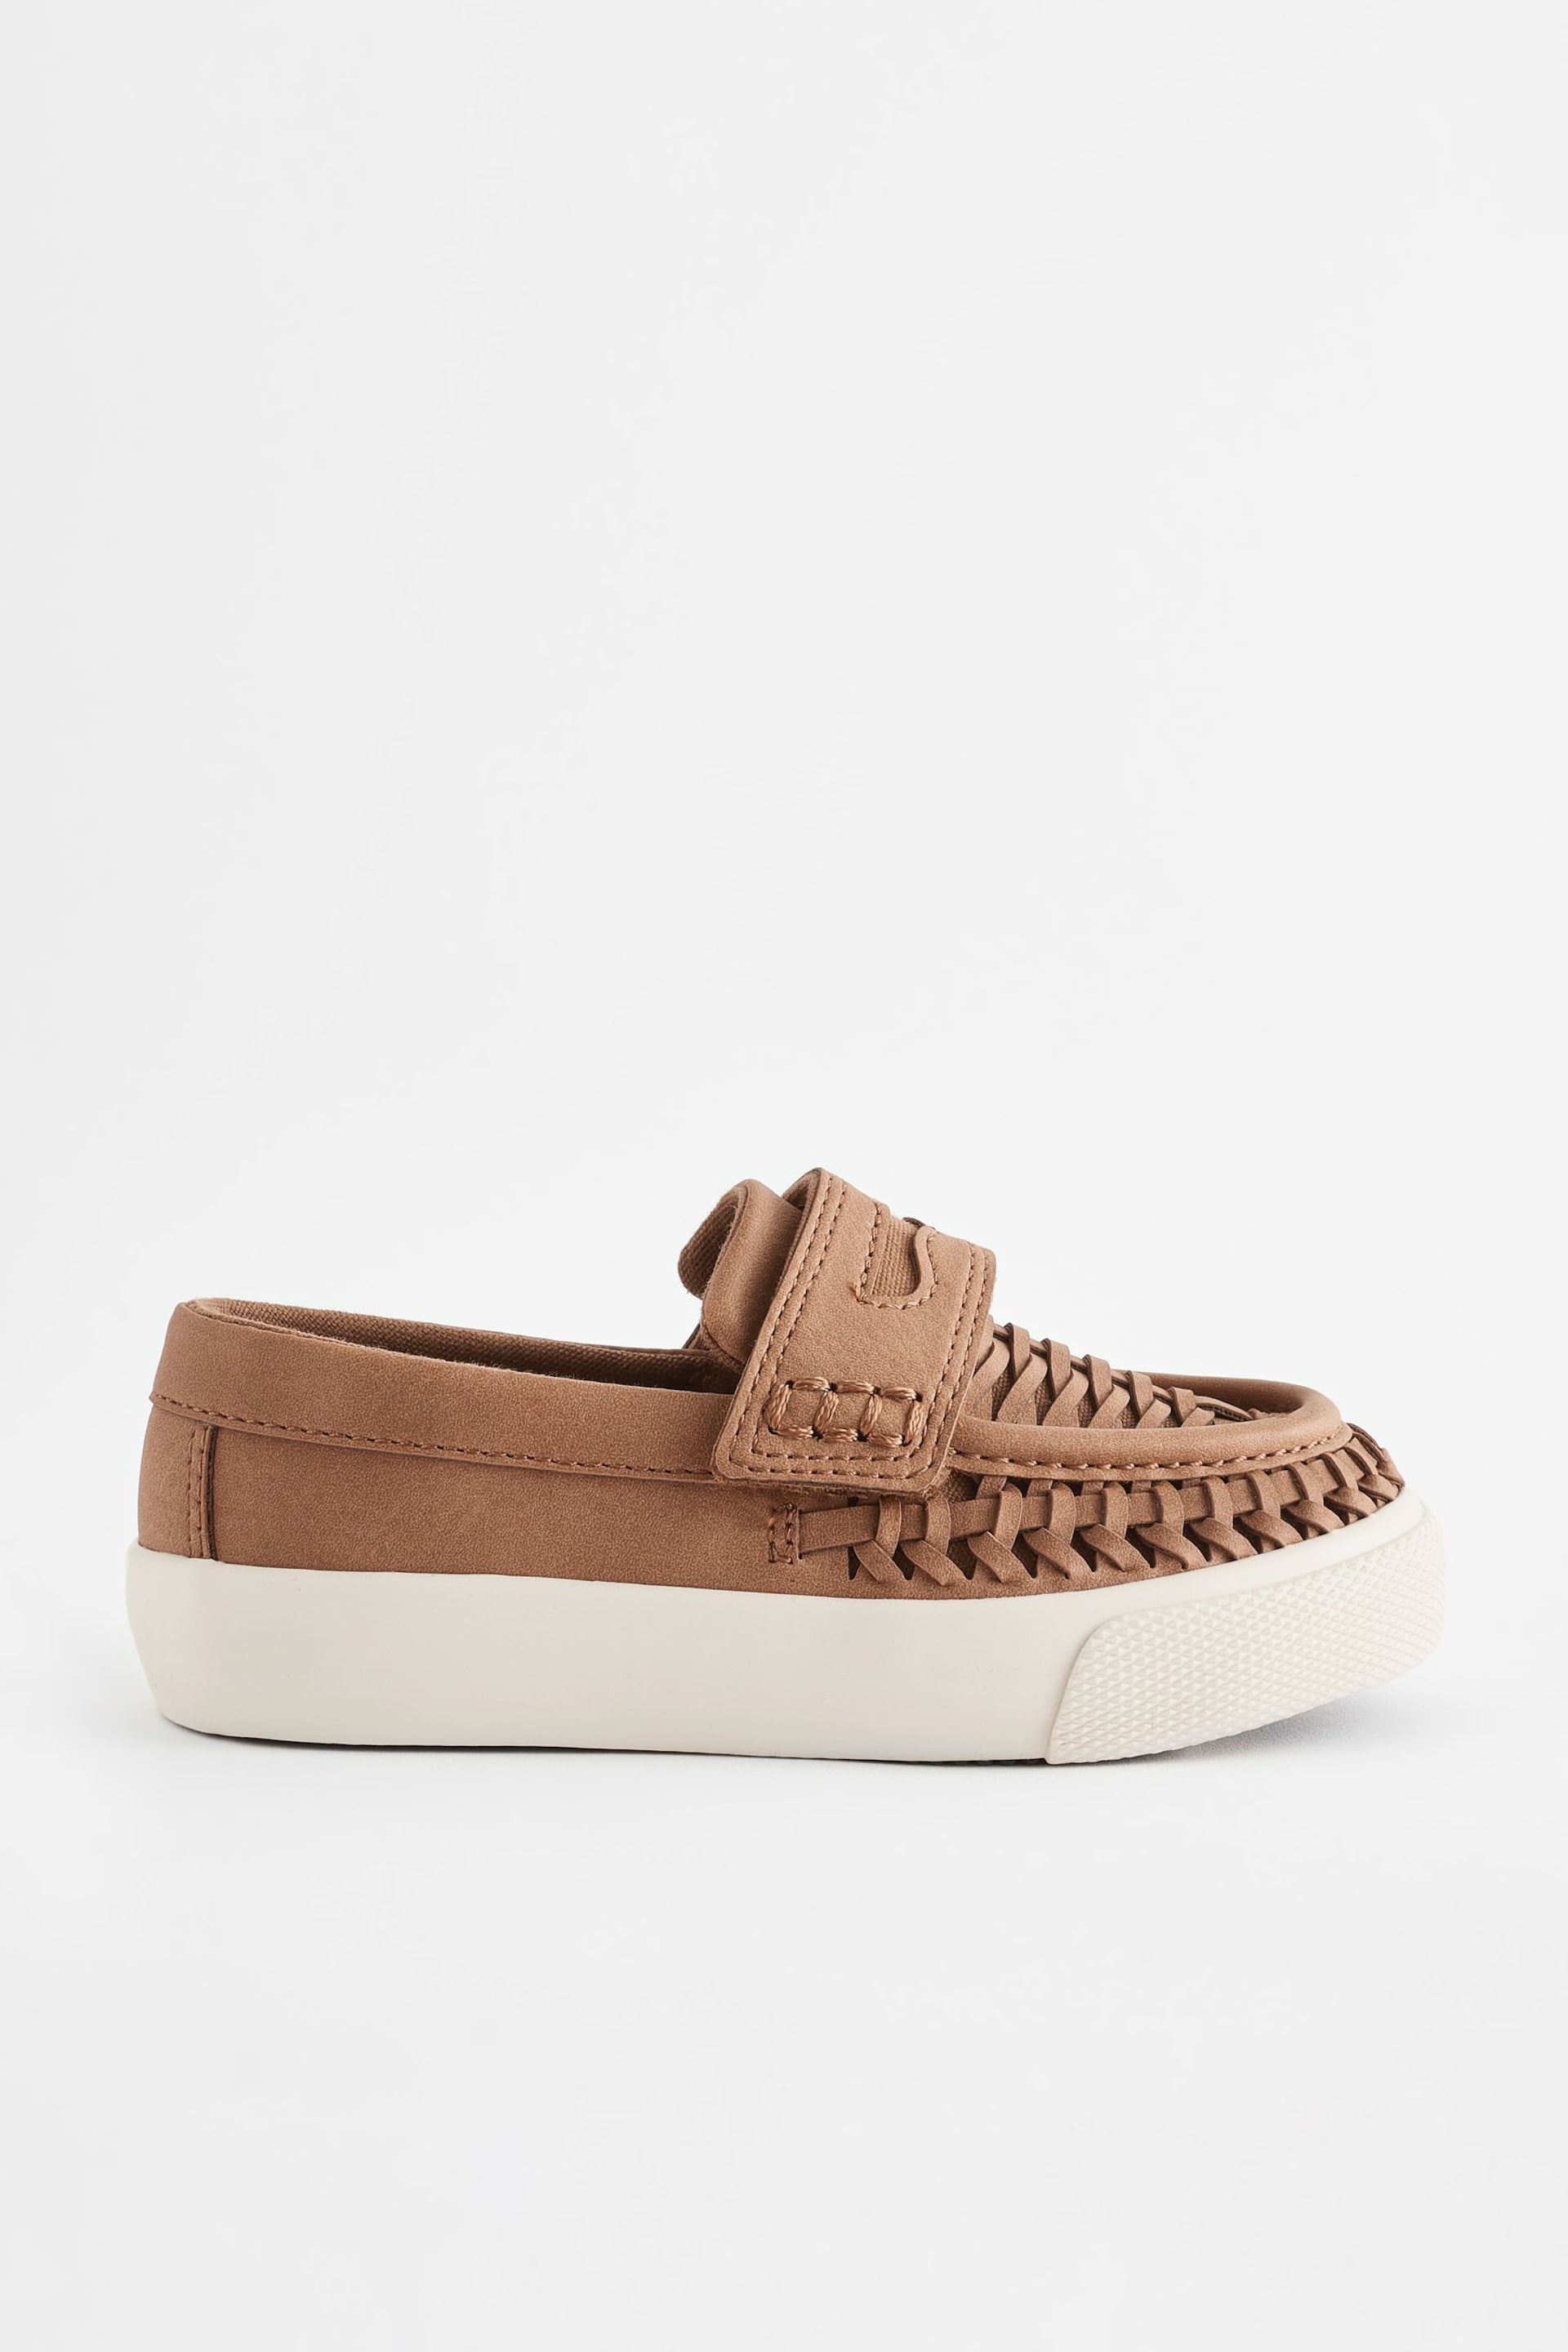 Tan Brown Standard Fit (F) Woven Loafers - Image 1 of 7